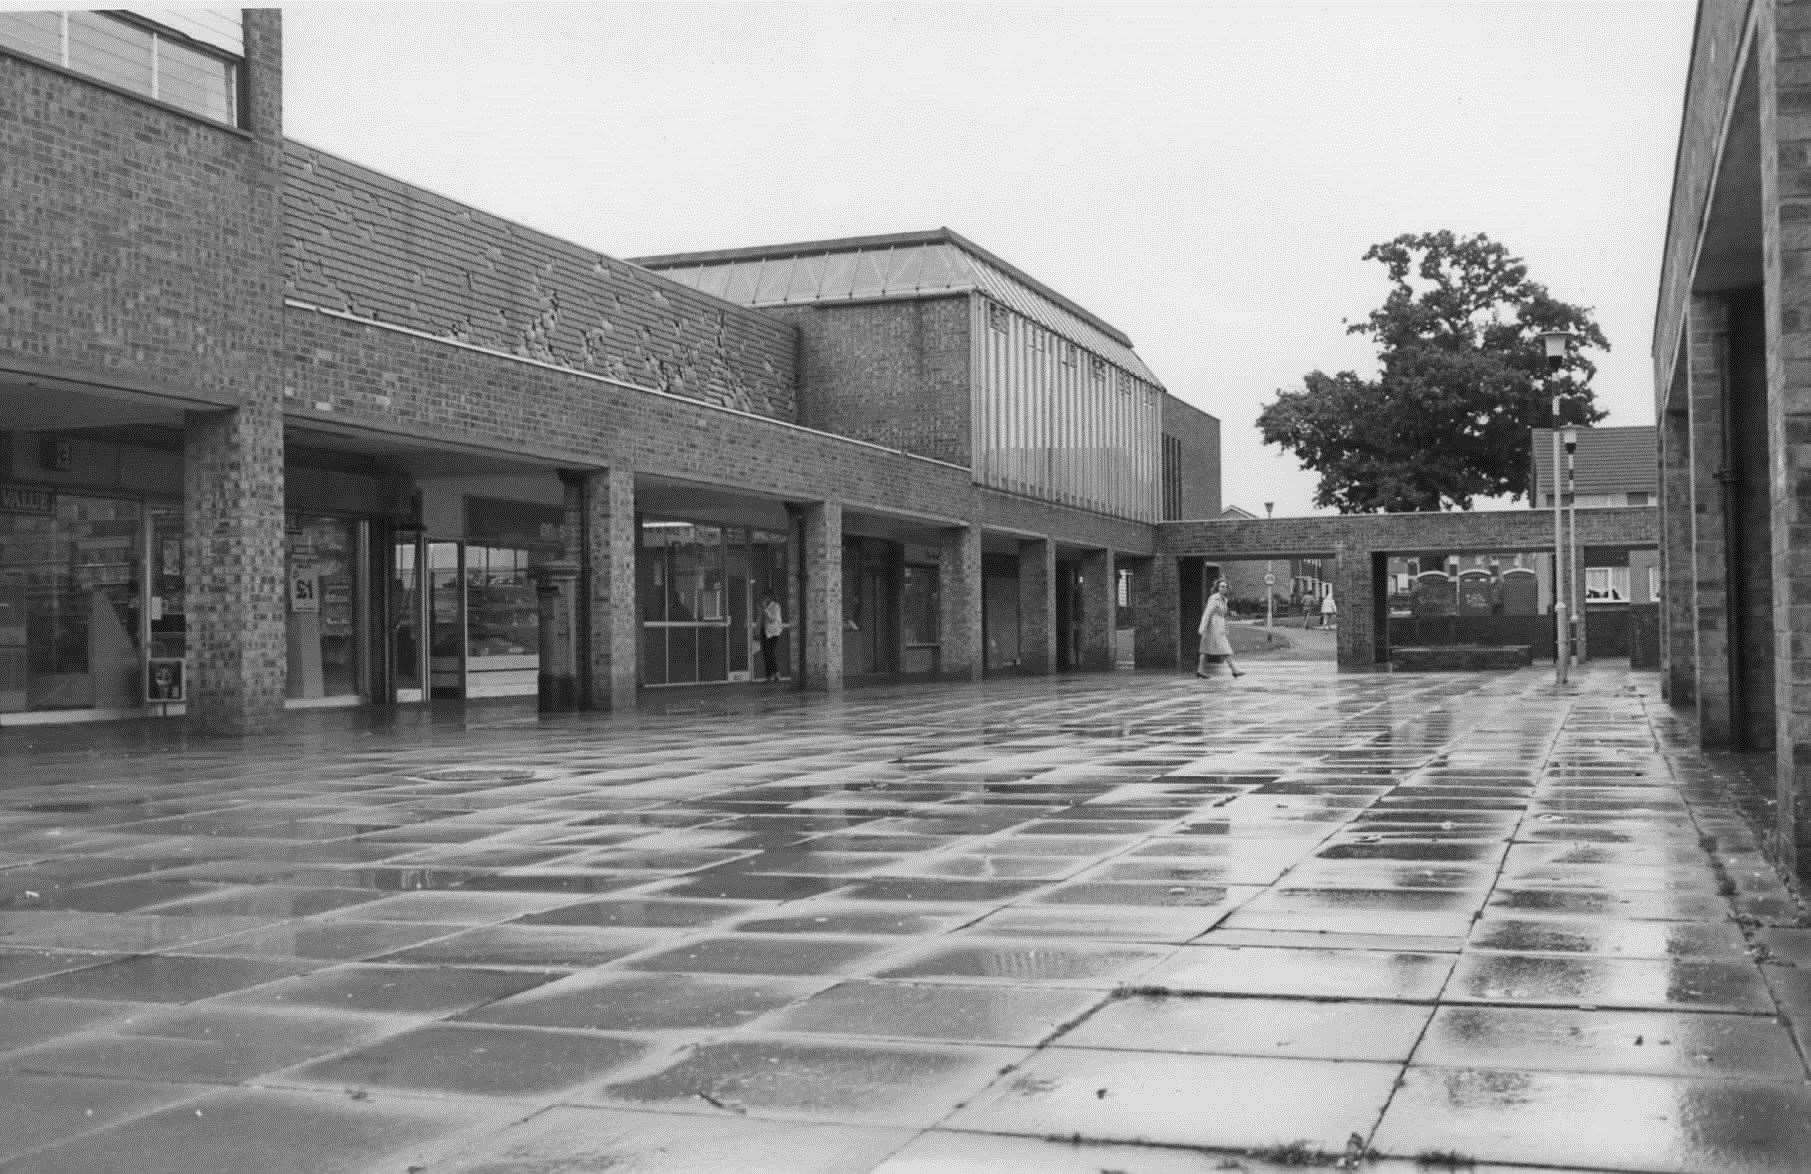 The Stanhope shopping precinct, seen here in September 1982, was a centre for commerce in the estate